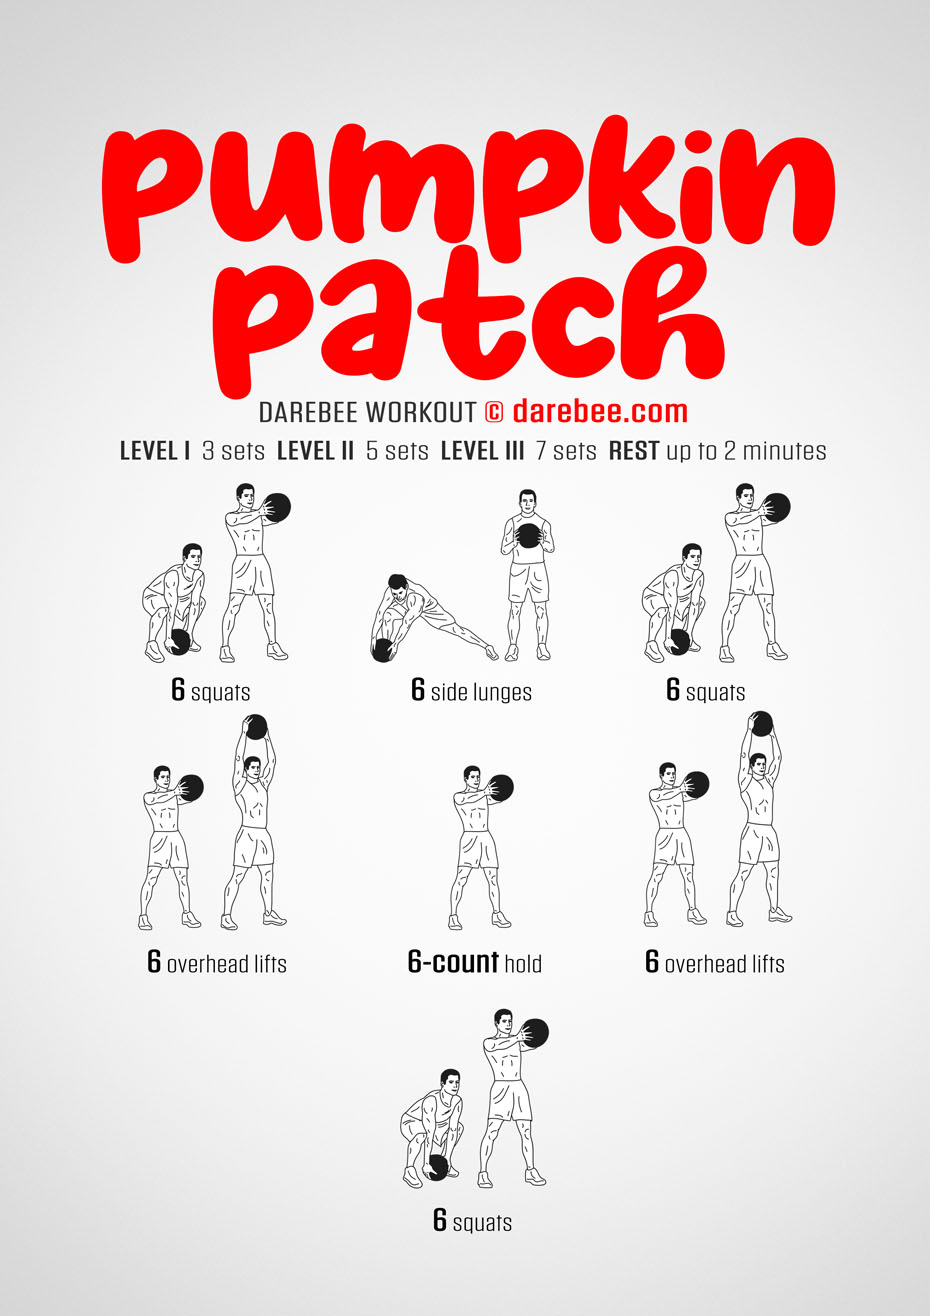 Pumpkin Patch is a home-fitness workout that lets you use that medicine ball you have lying around in a way that will amplify the effect of the exercises on the load-bearing muscles of your body.